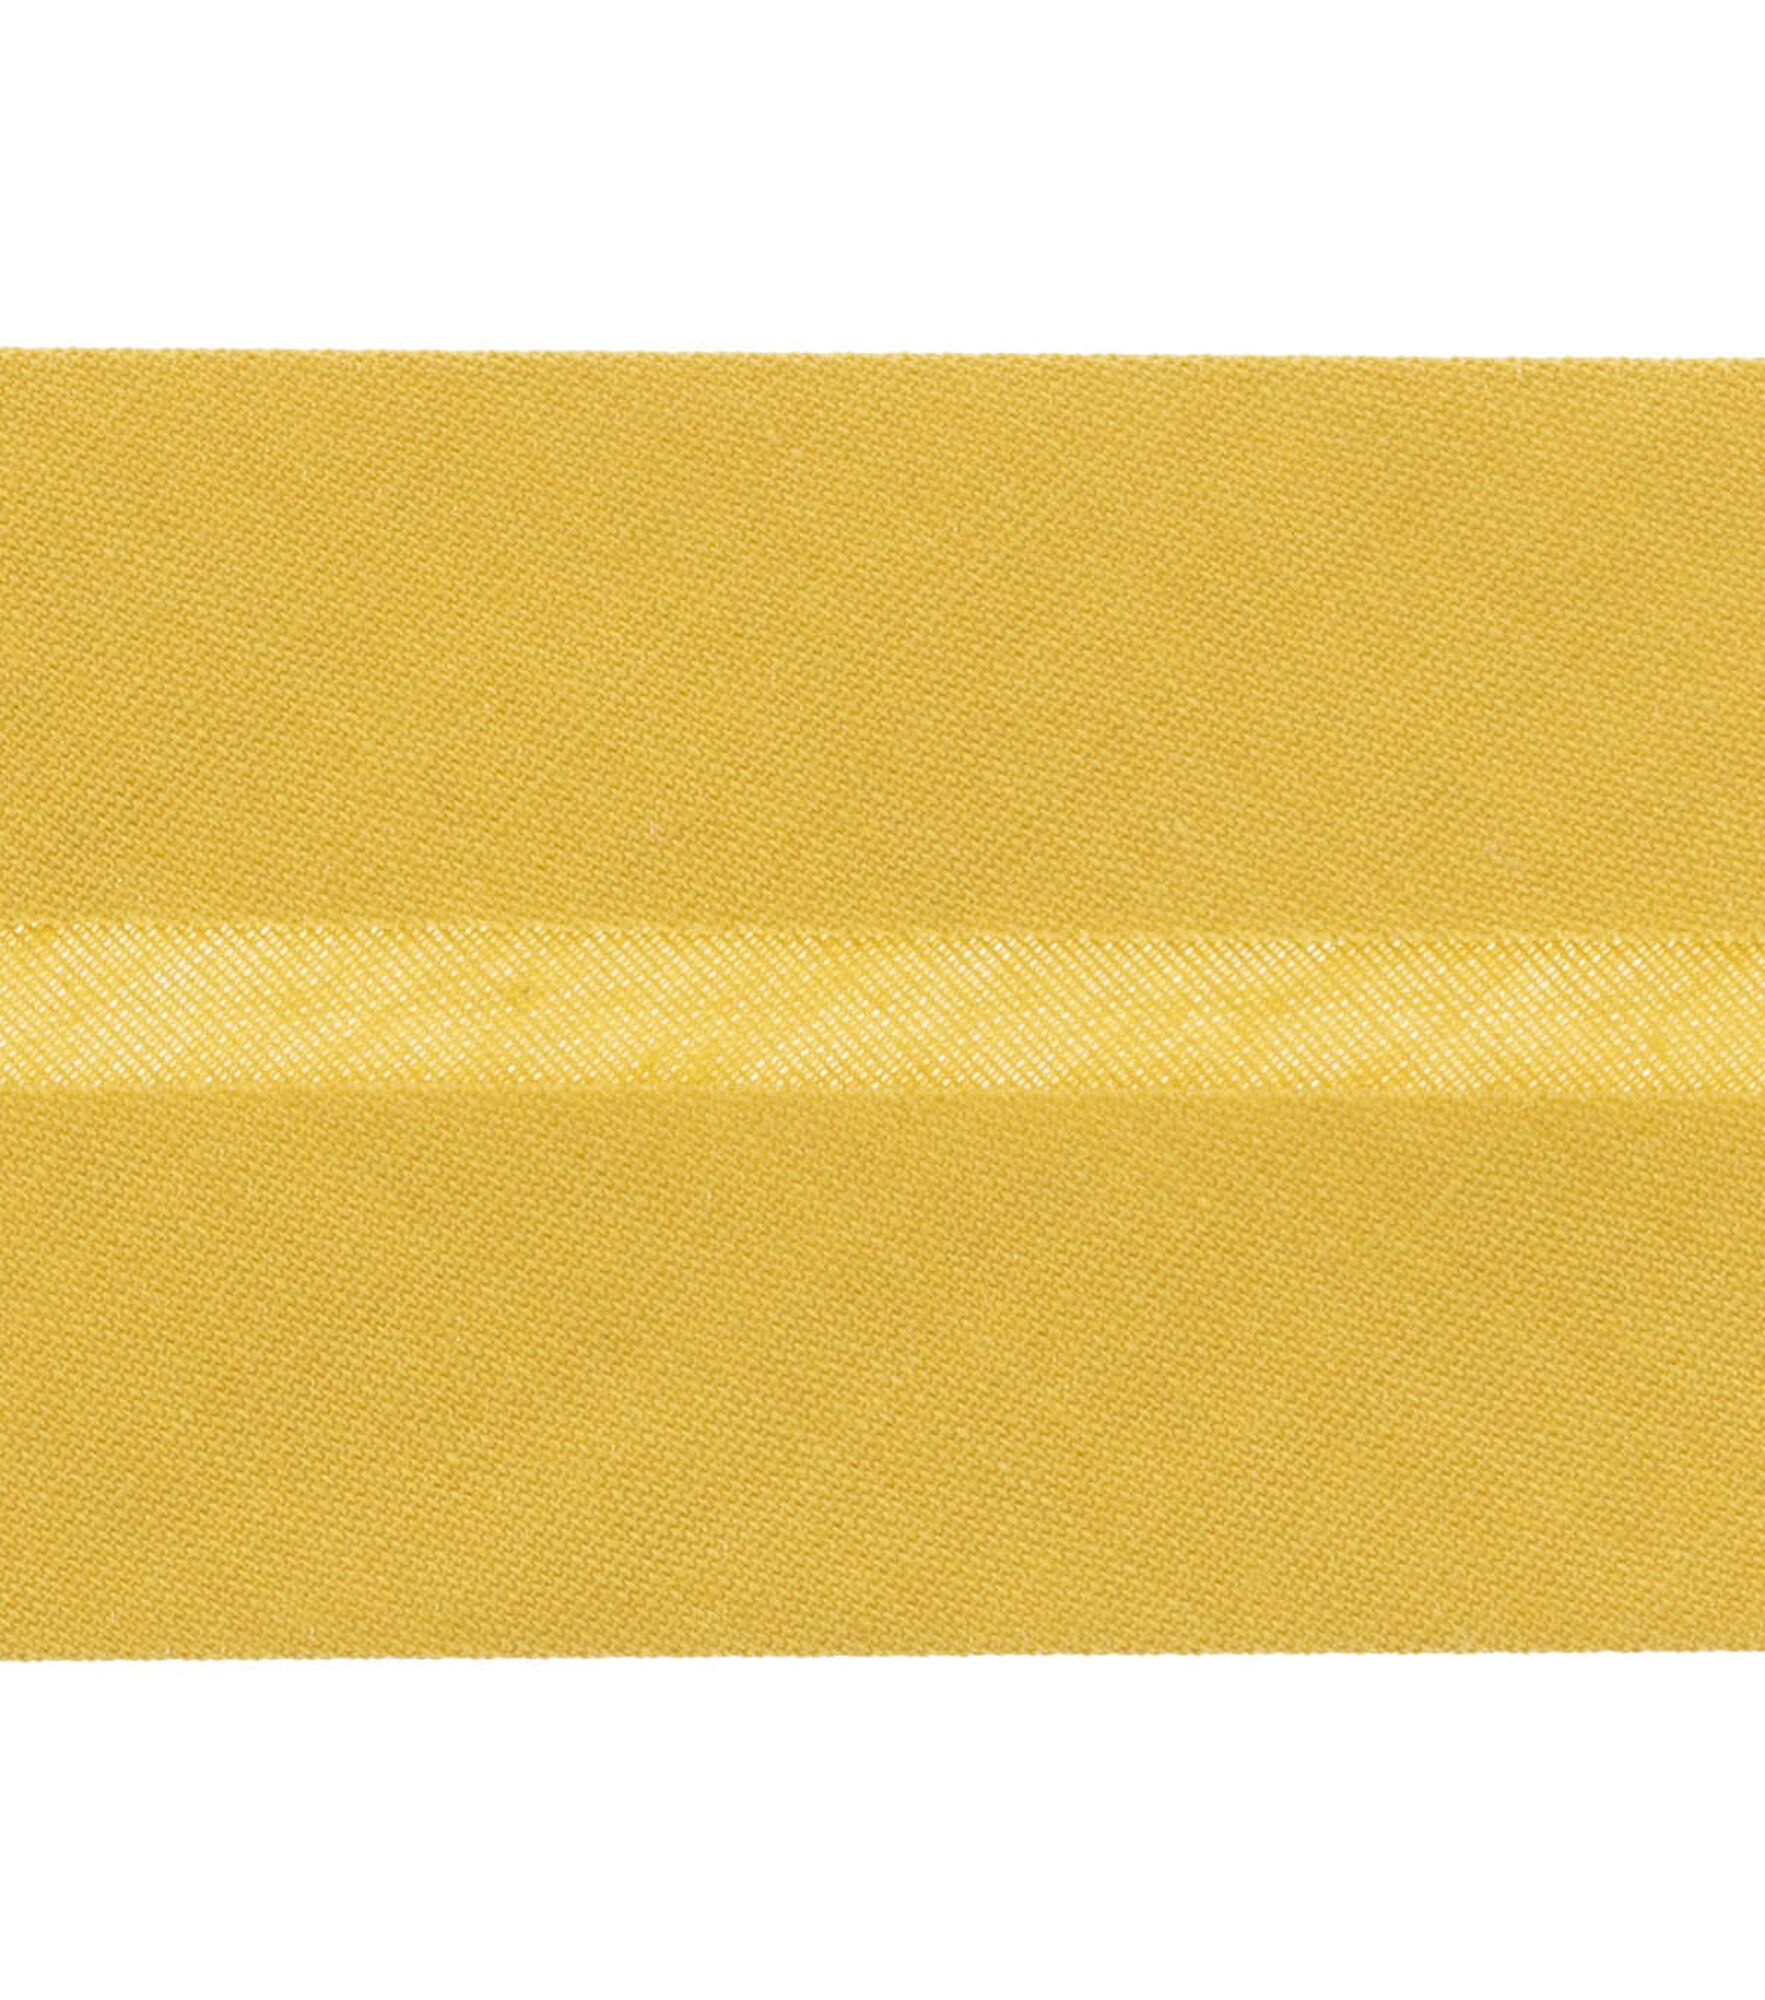 Wrights 7/8" x 3yd Double Fold Quilt Binding, Mustard, hi-res